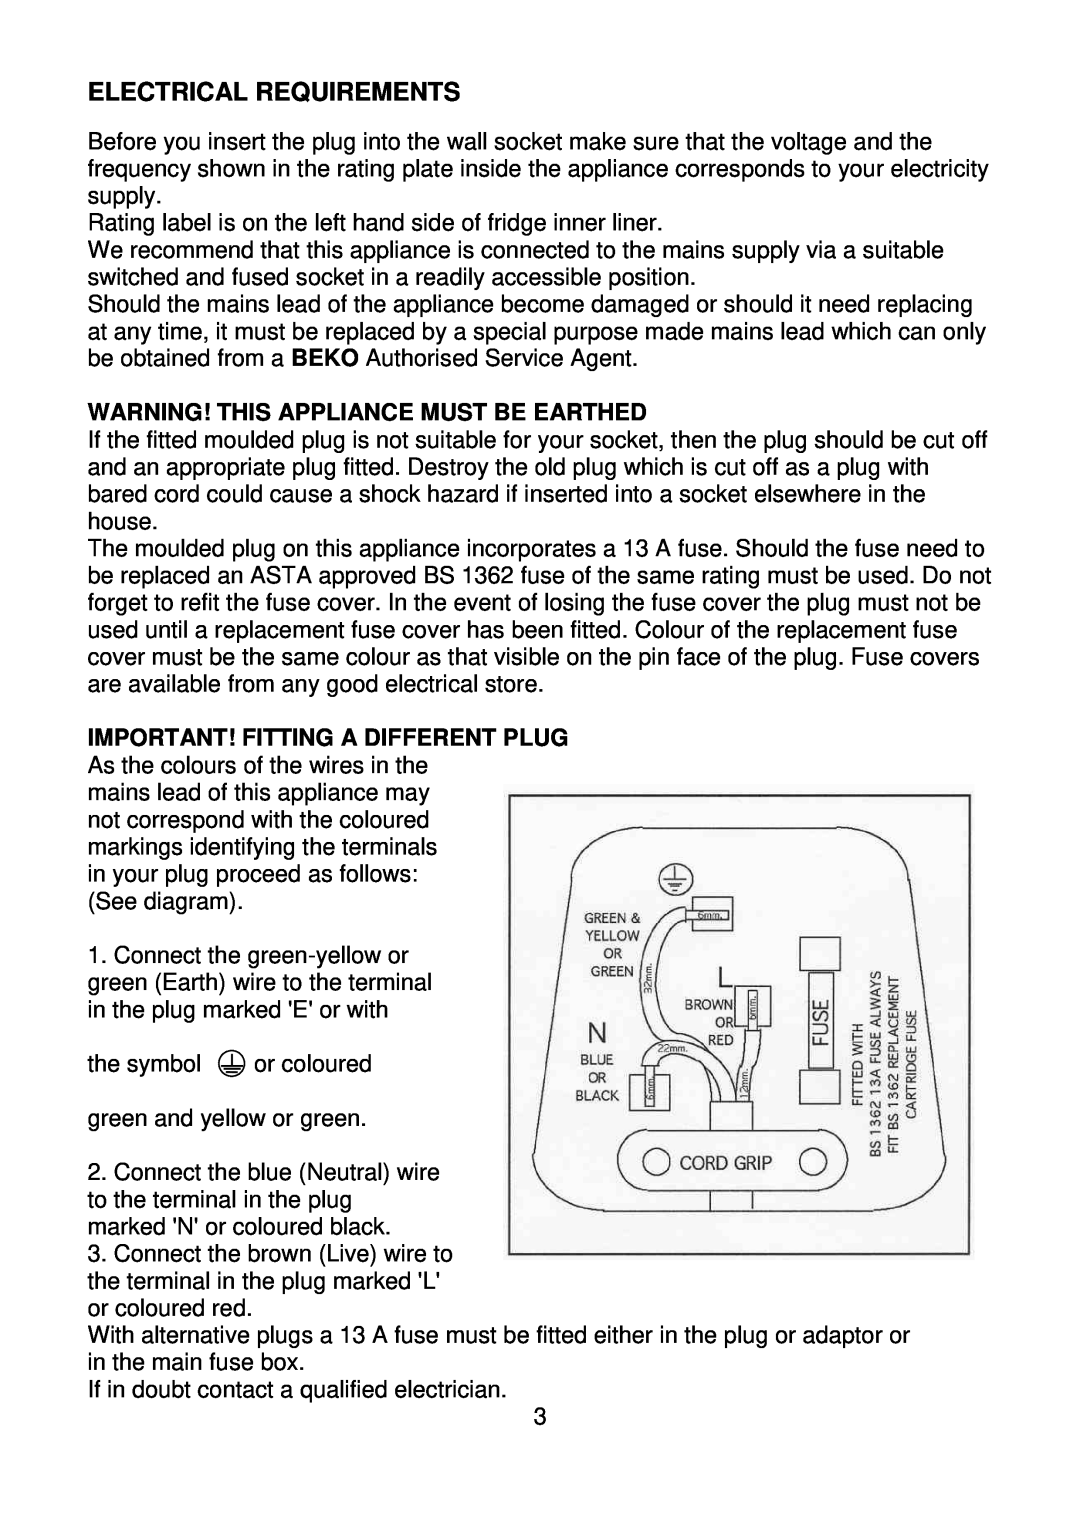 Beko CS5342APW manual Electrical Requirements, Warning! This Appliance Must Be Earthed, Important! Fitting A Different Plug 